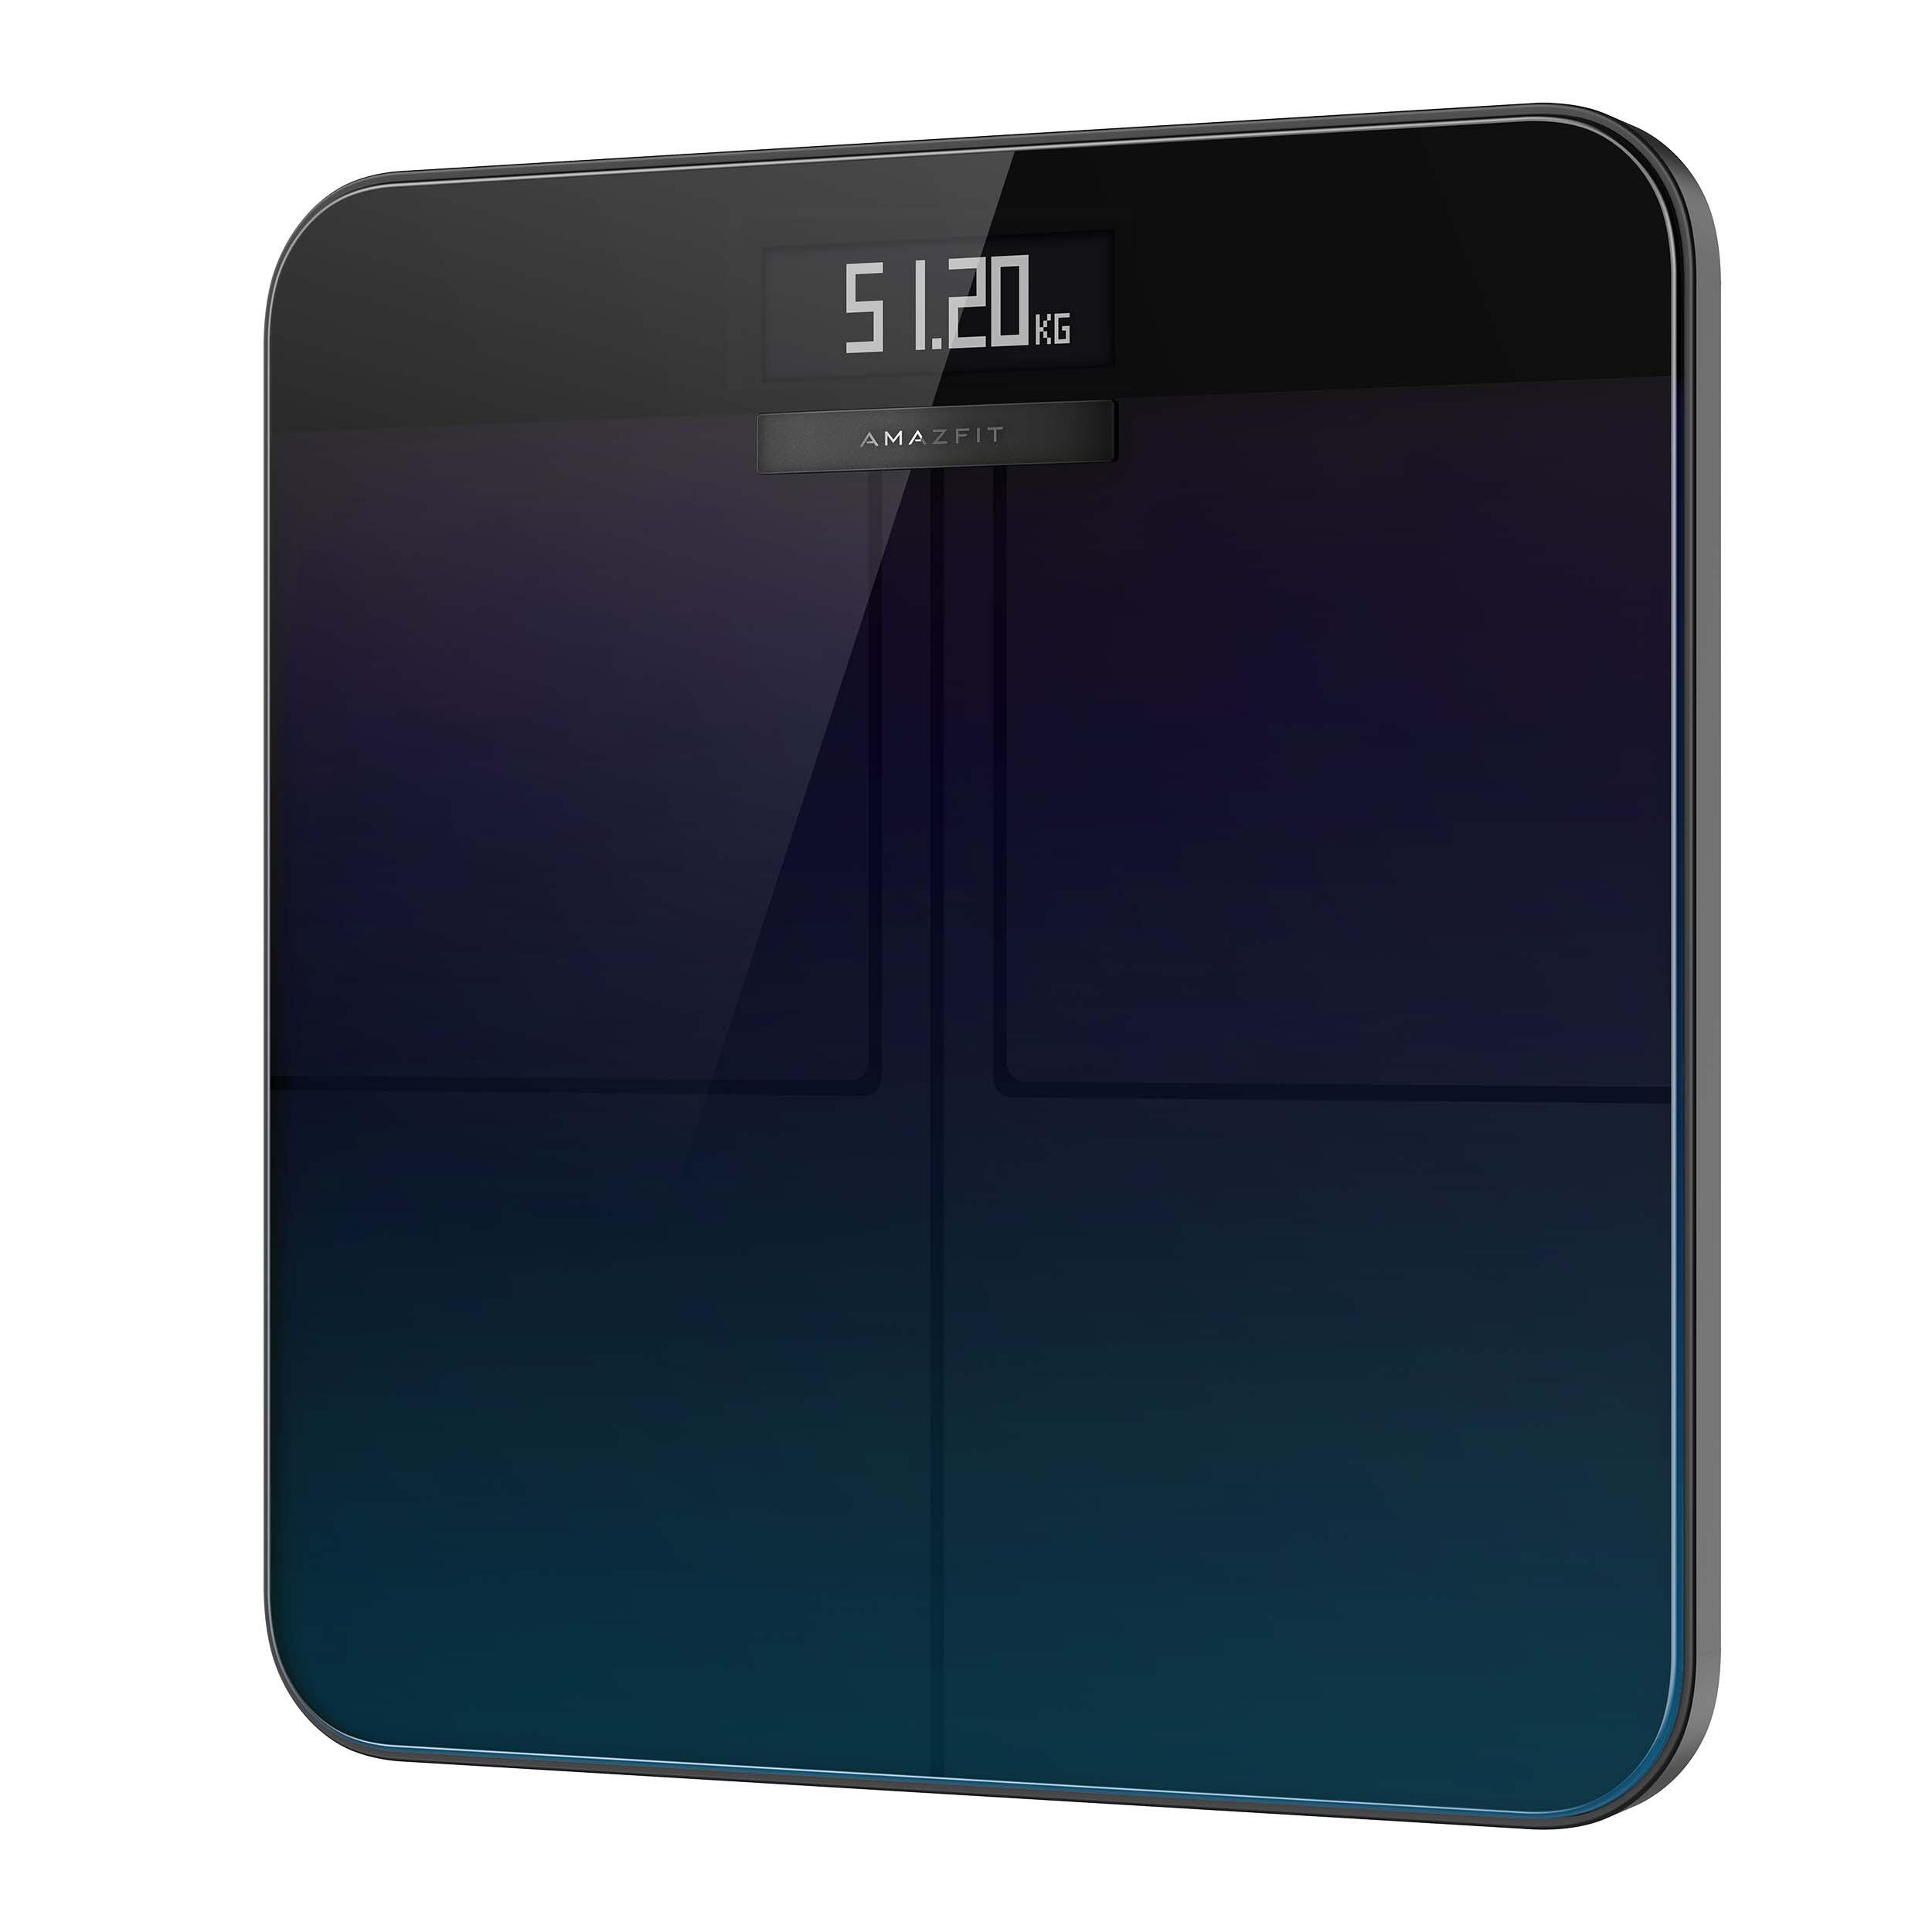 Amazfit Multi-Function Connected Smart Scale 2/5